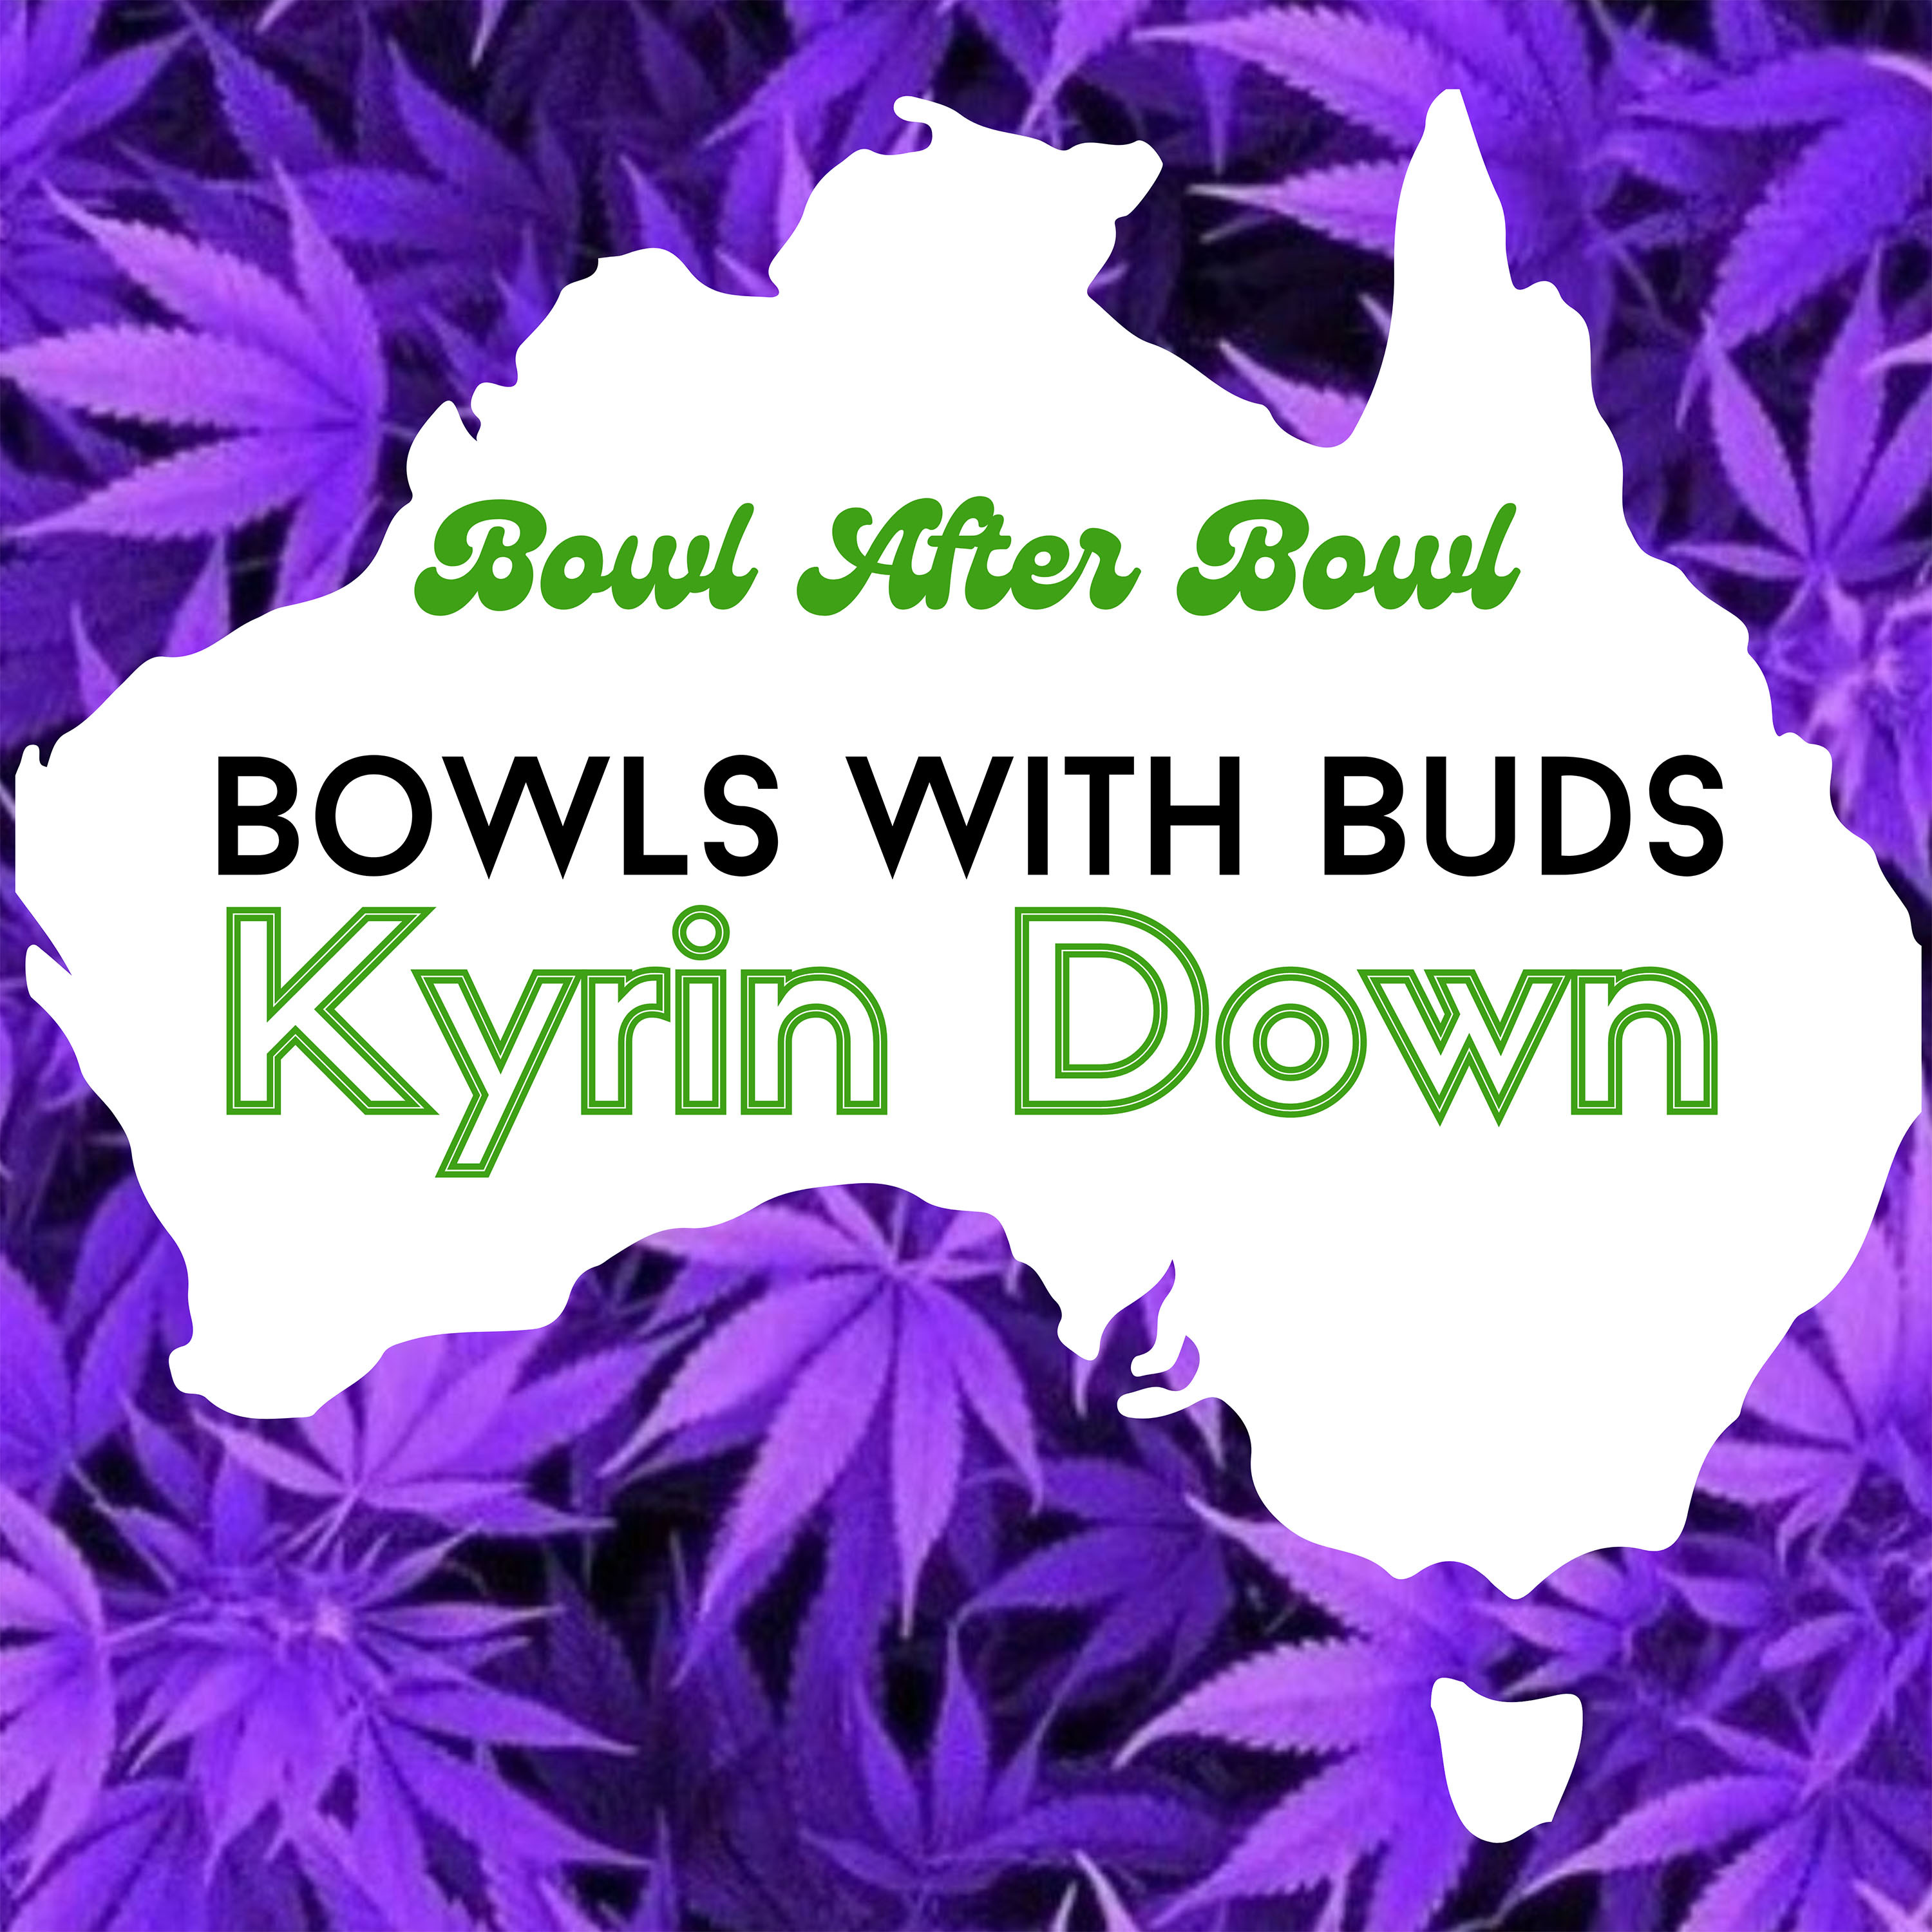 Episode 178 ★ Bowls With Buds ★ Kyrin Down